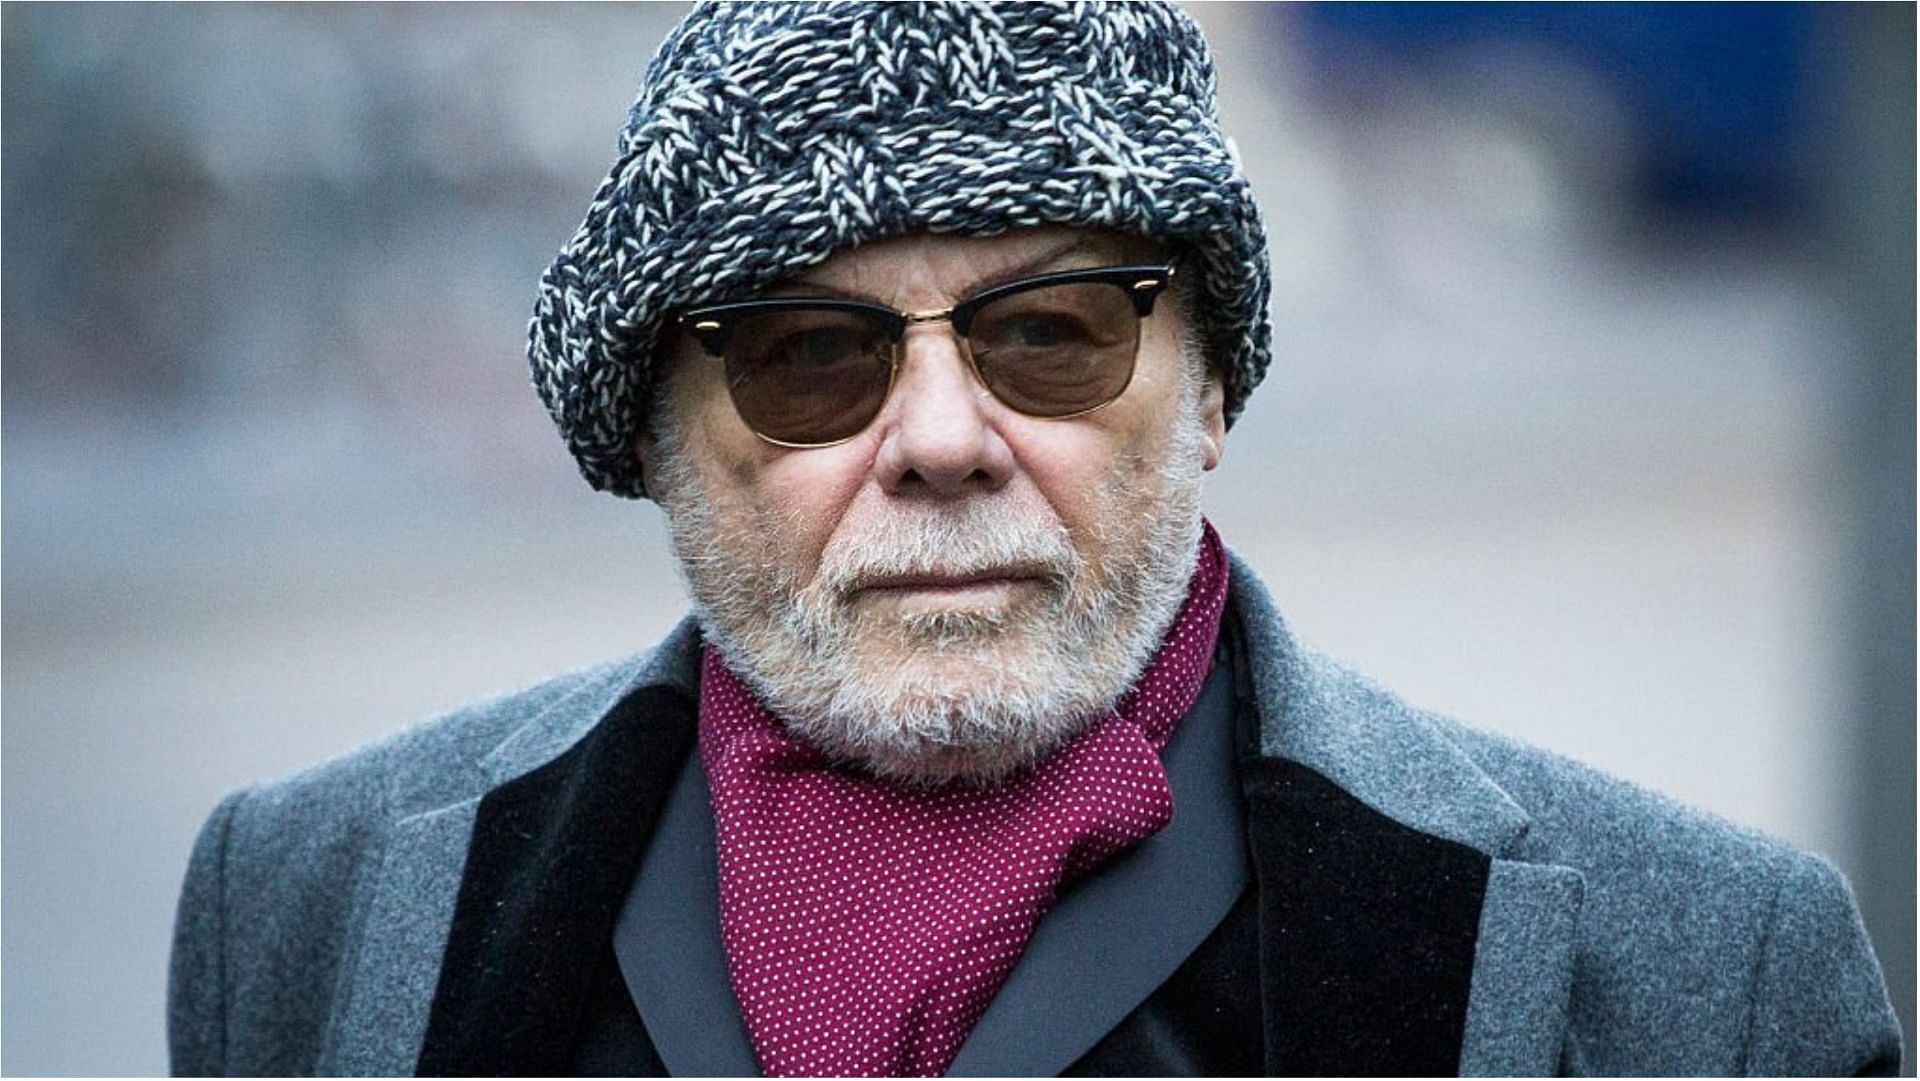 Gary Glitter was found guilty in 2015 (Image via Rob Stothard/Getty Images)